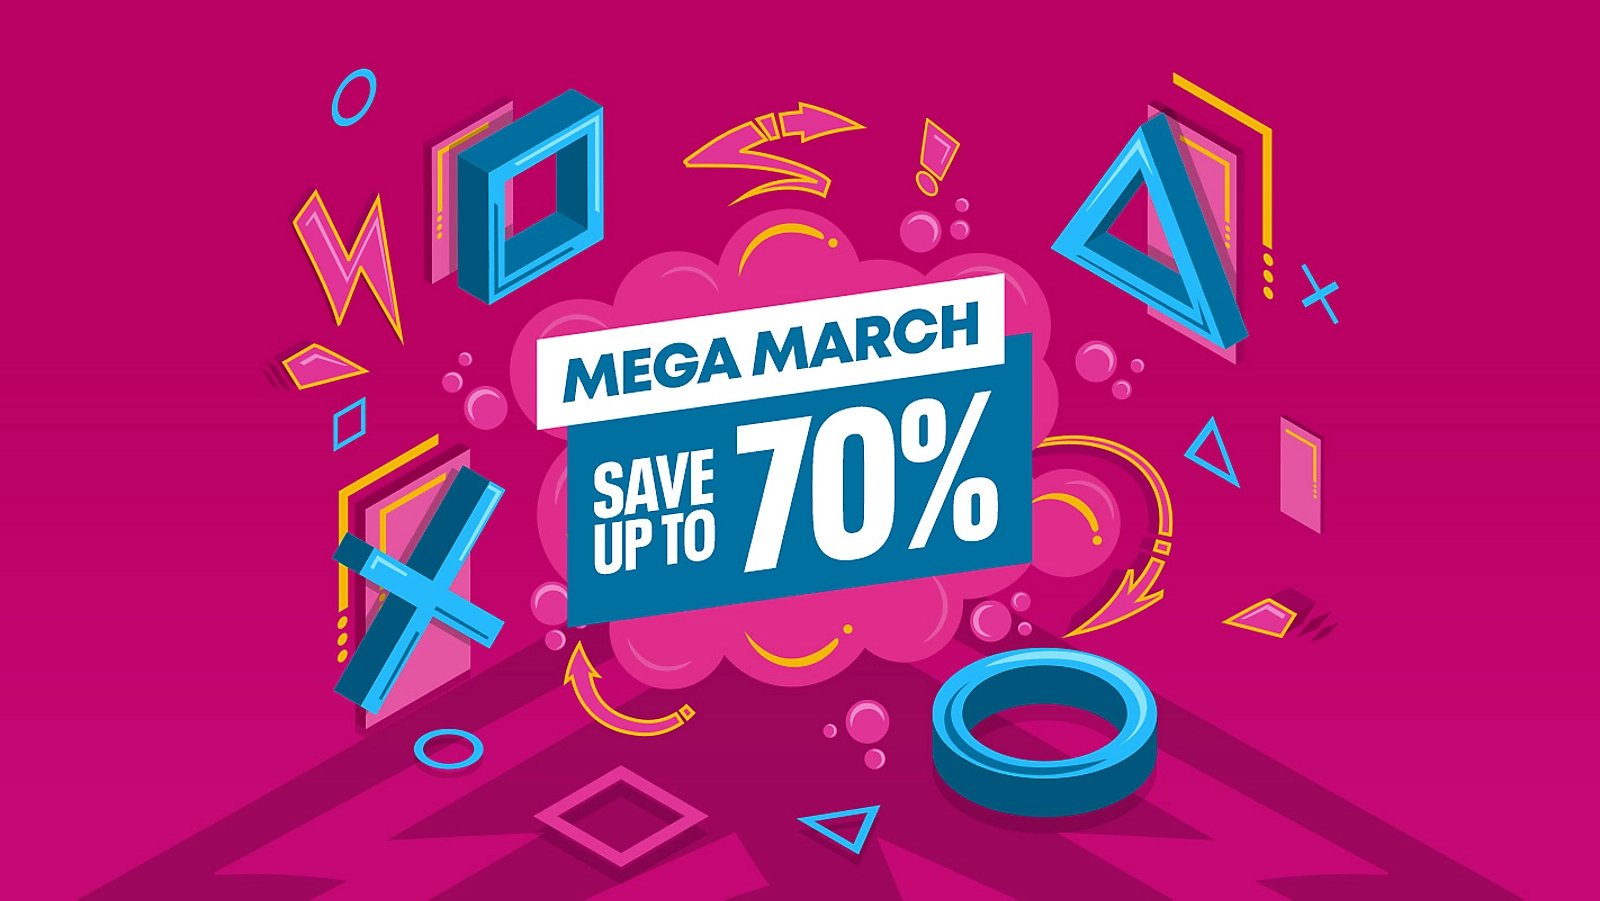 Playstation Mega March - Up to 70% OFF on PS5, PS4 games